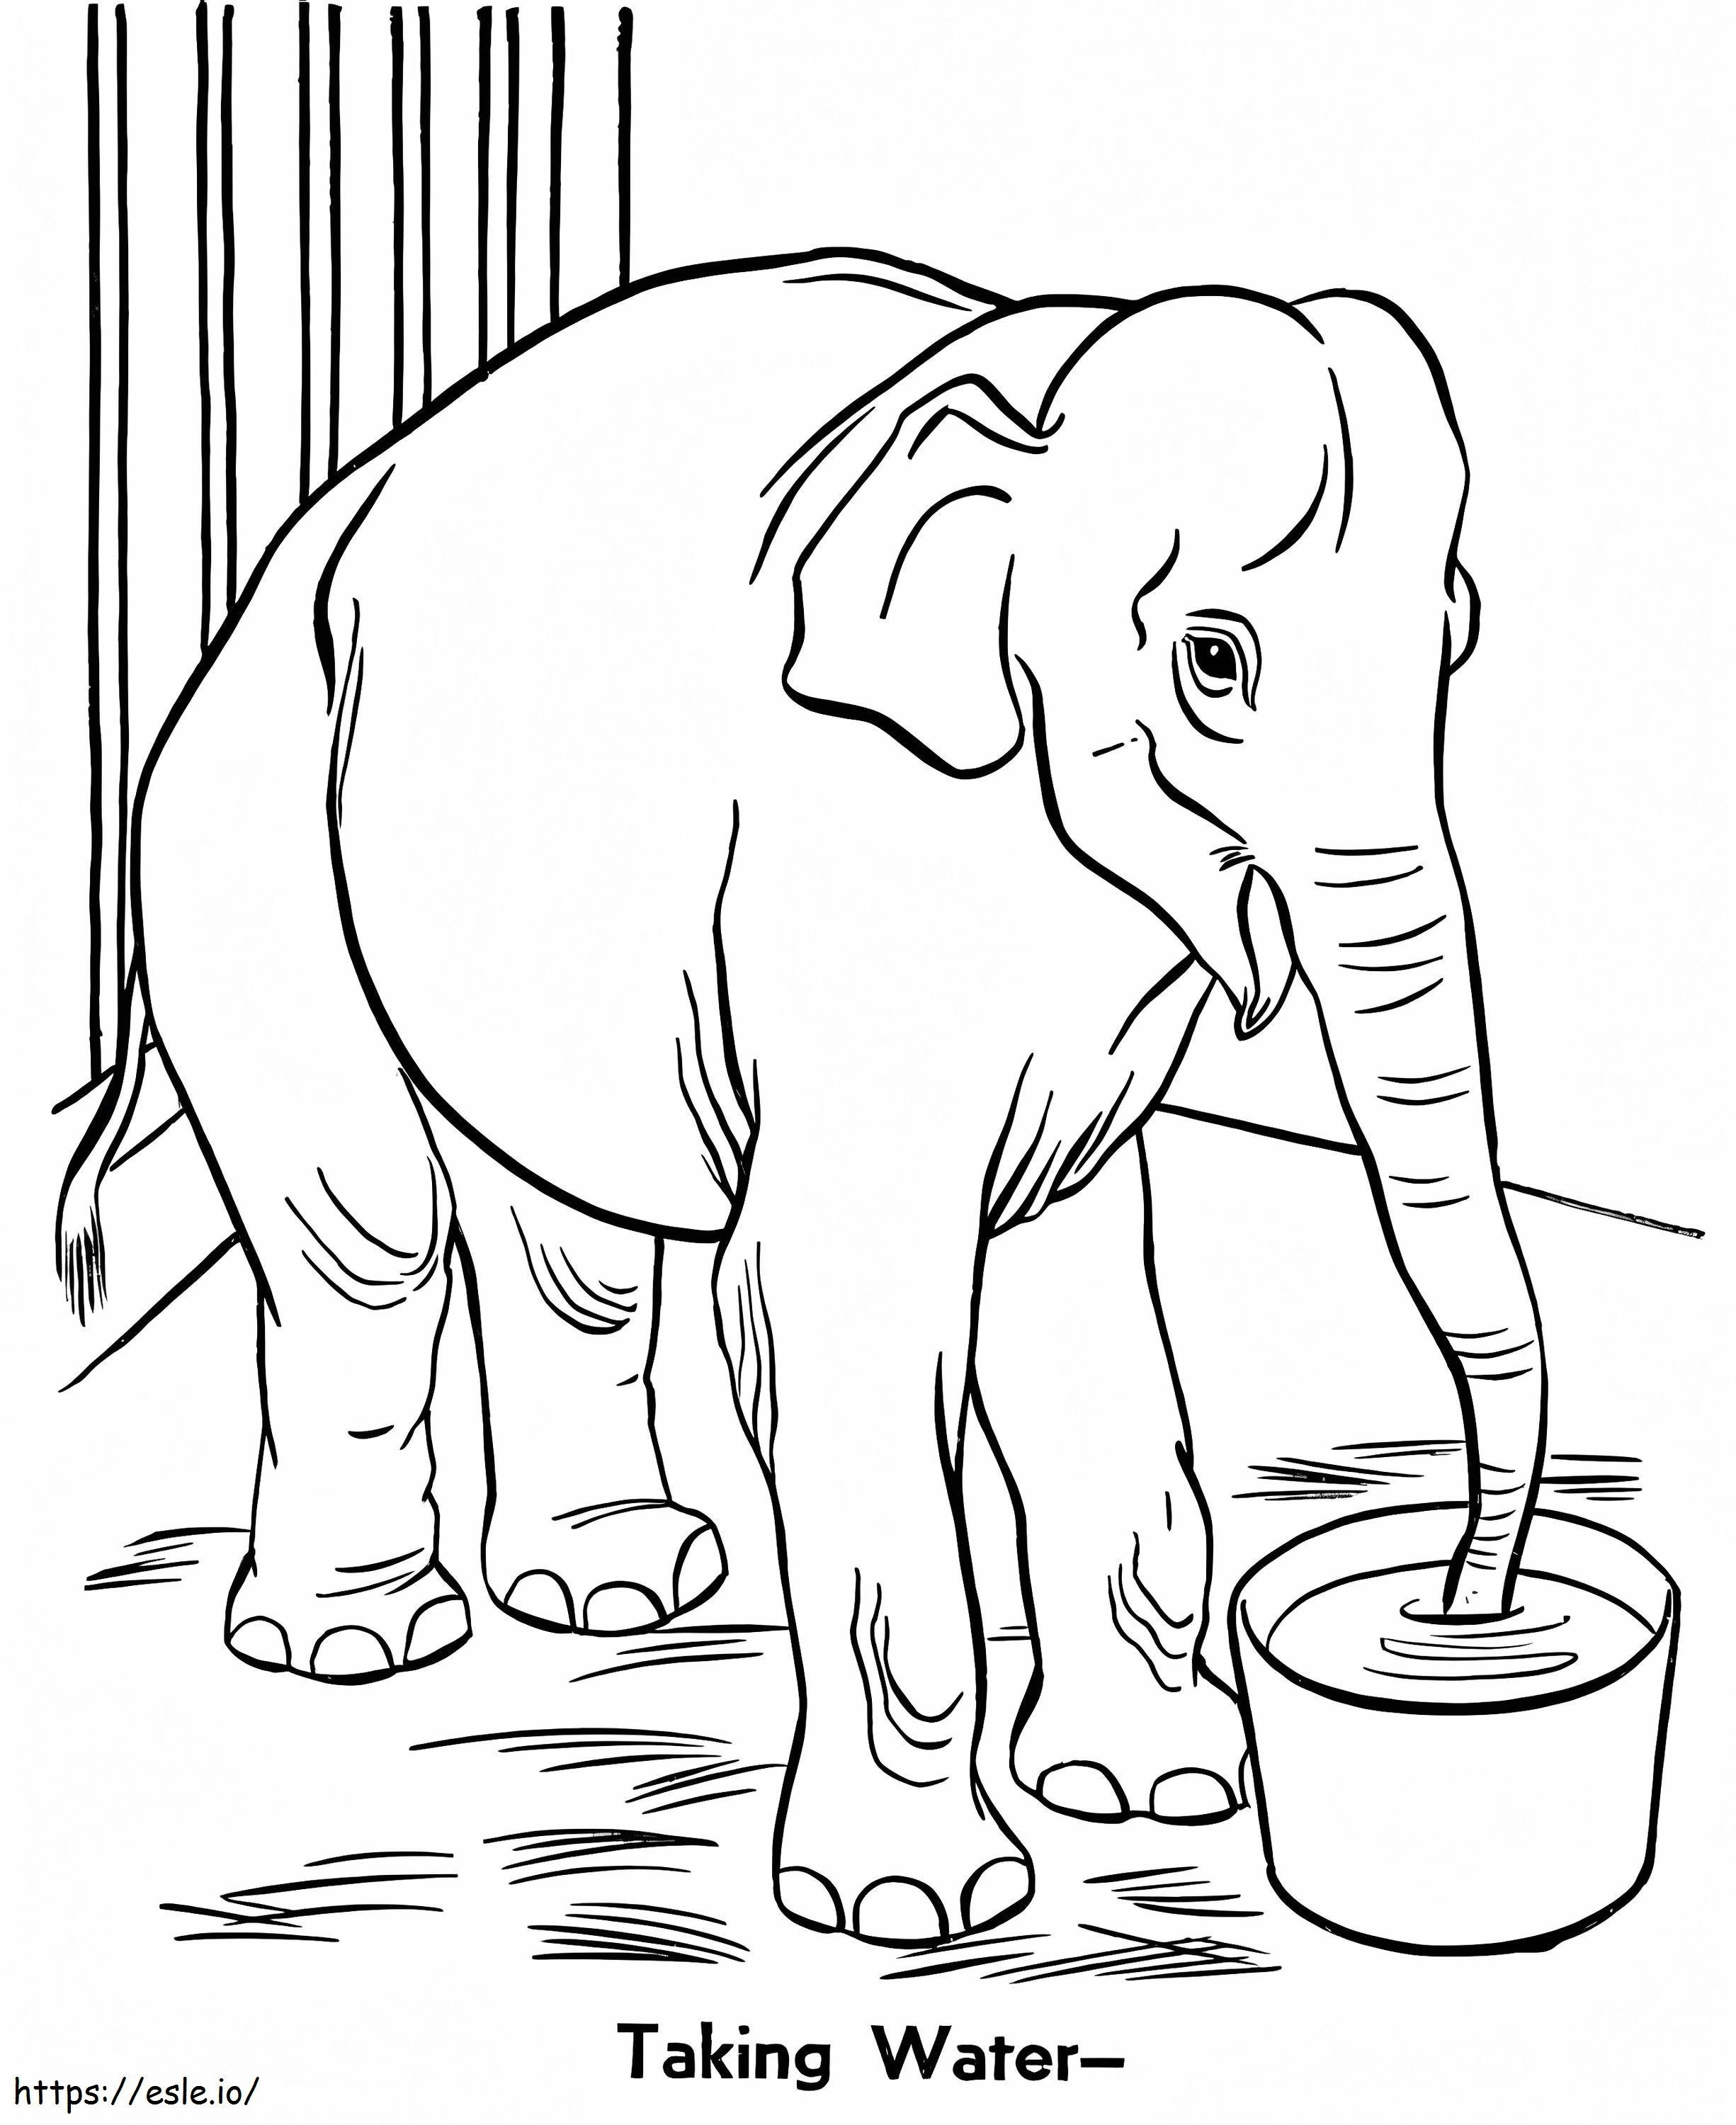 Elephant In A Zoo coloring page